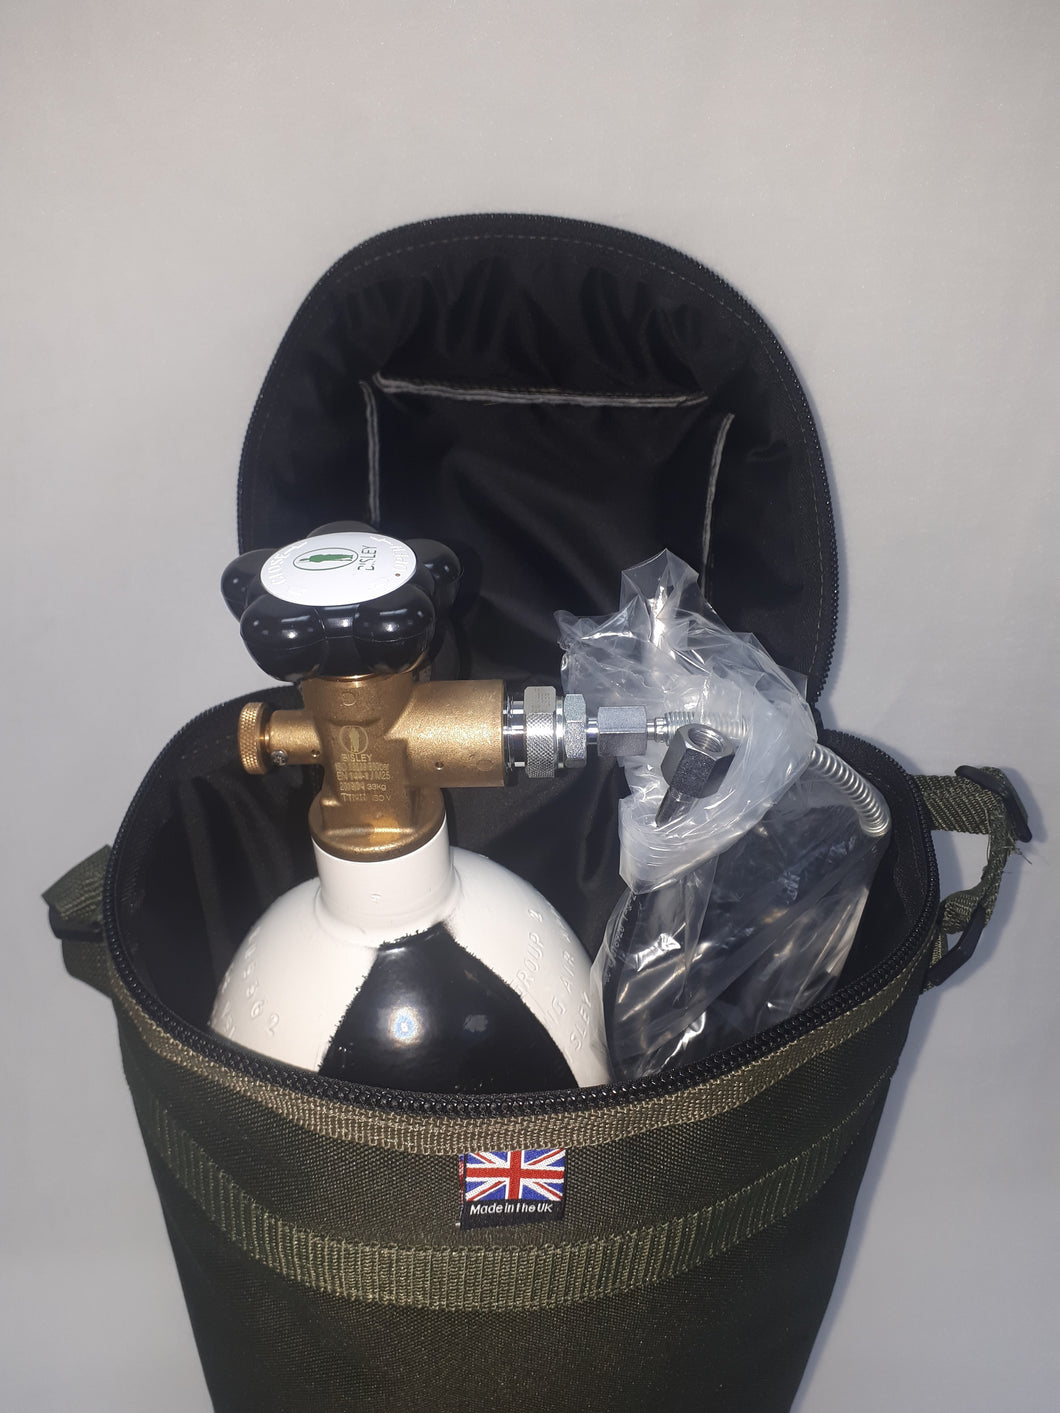 300 Bar Cylinder Bag.  Midwater PCP Air Rifle Cylinder Bottle Carrier.